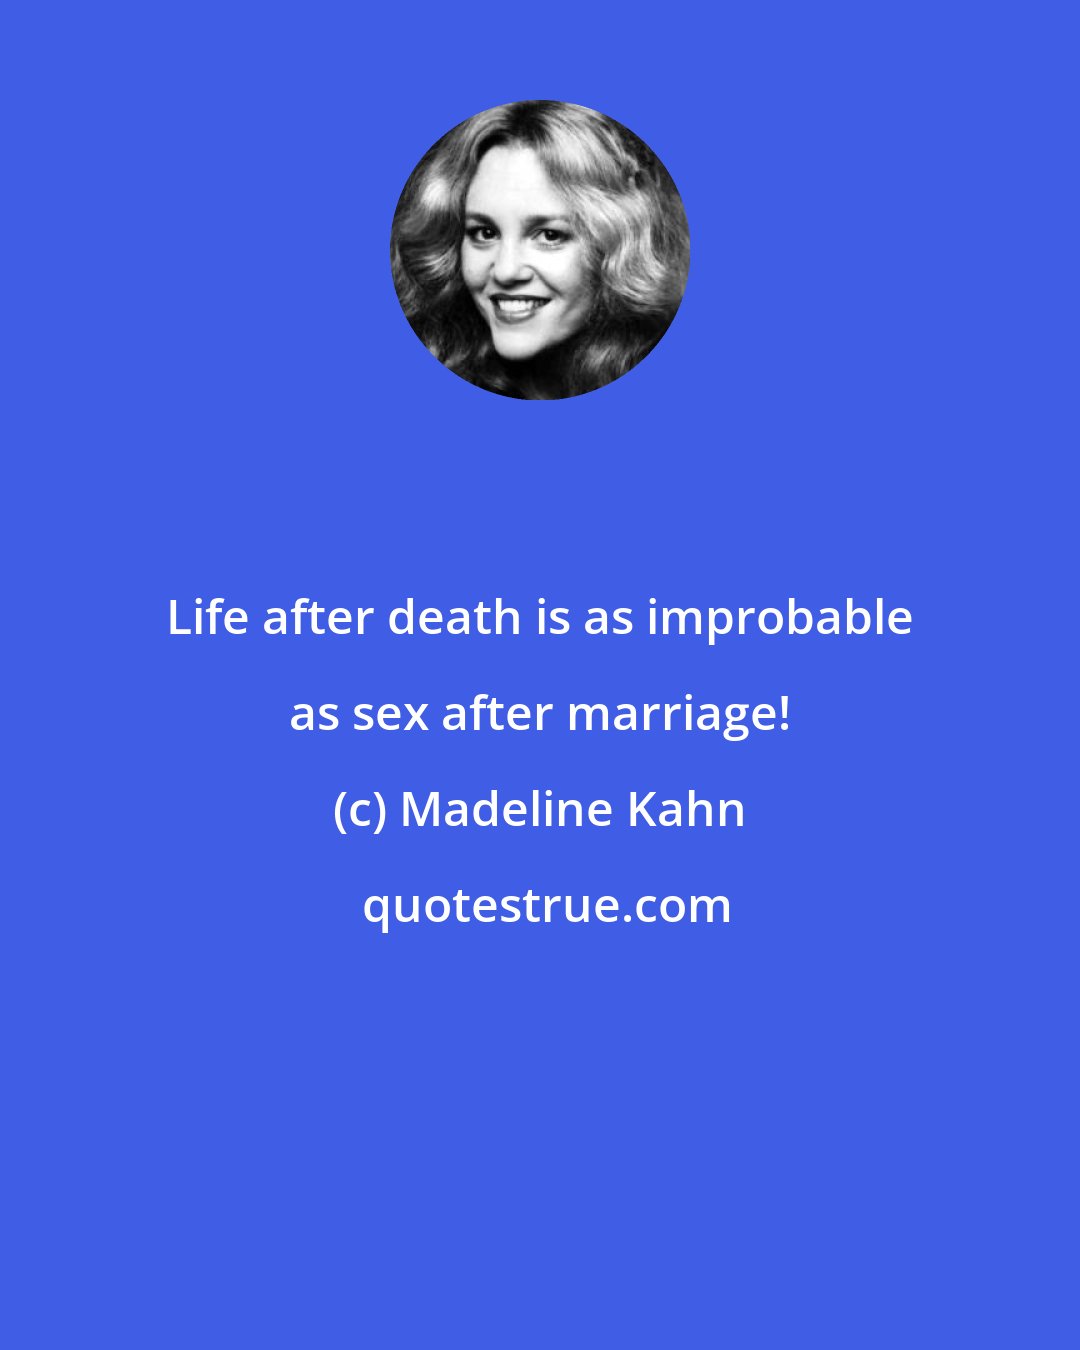 Madeline Kahn: Life after death is as improbable as sex after marriage!